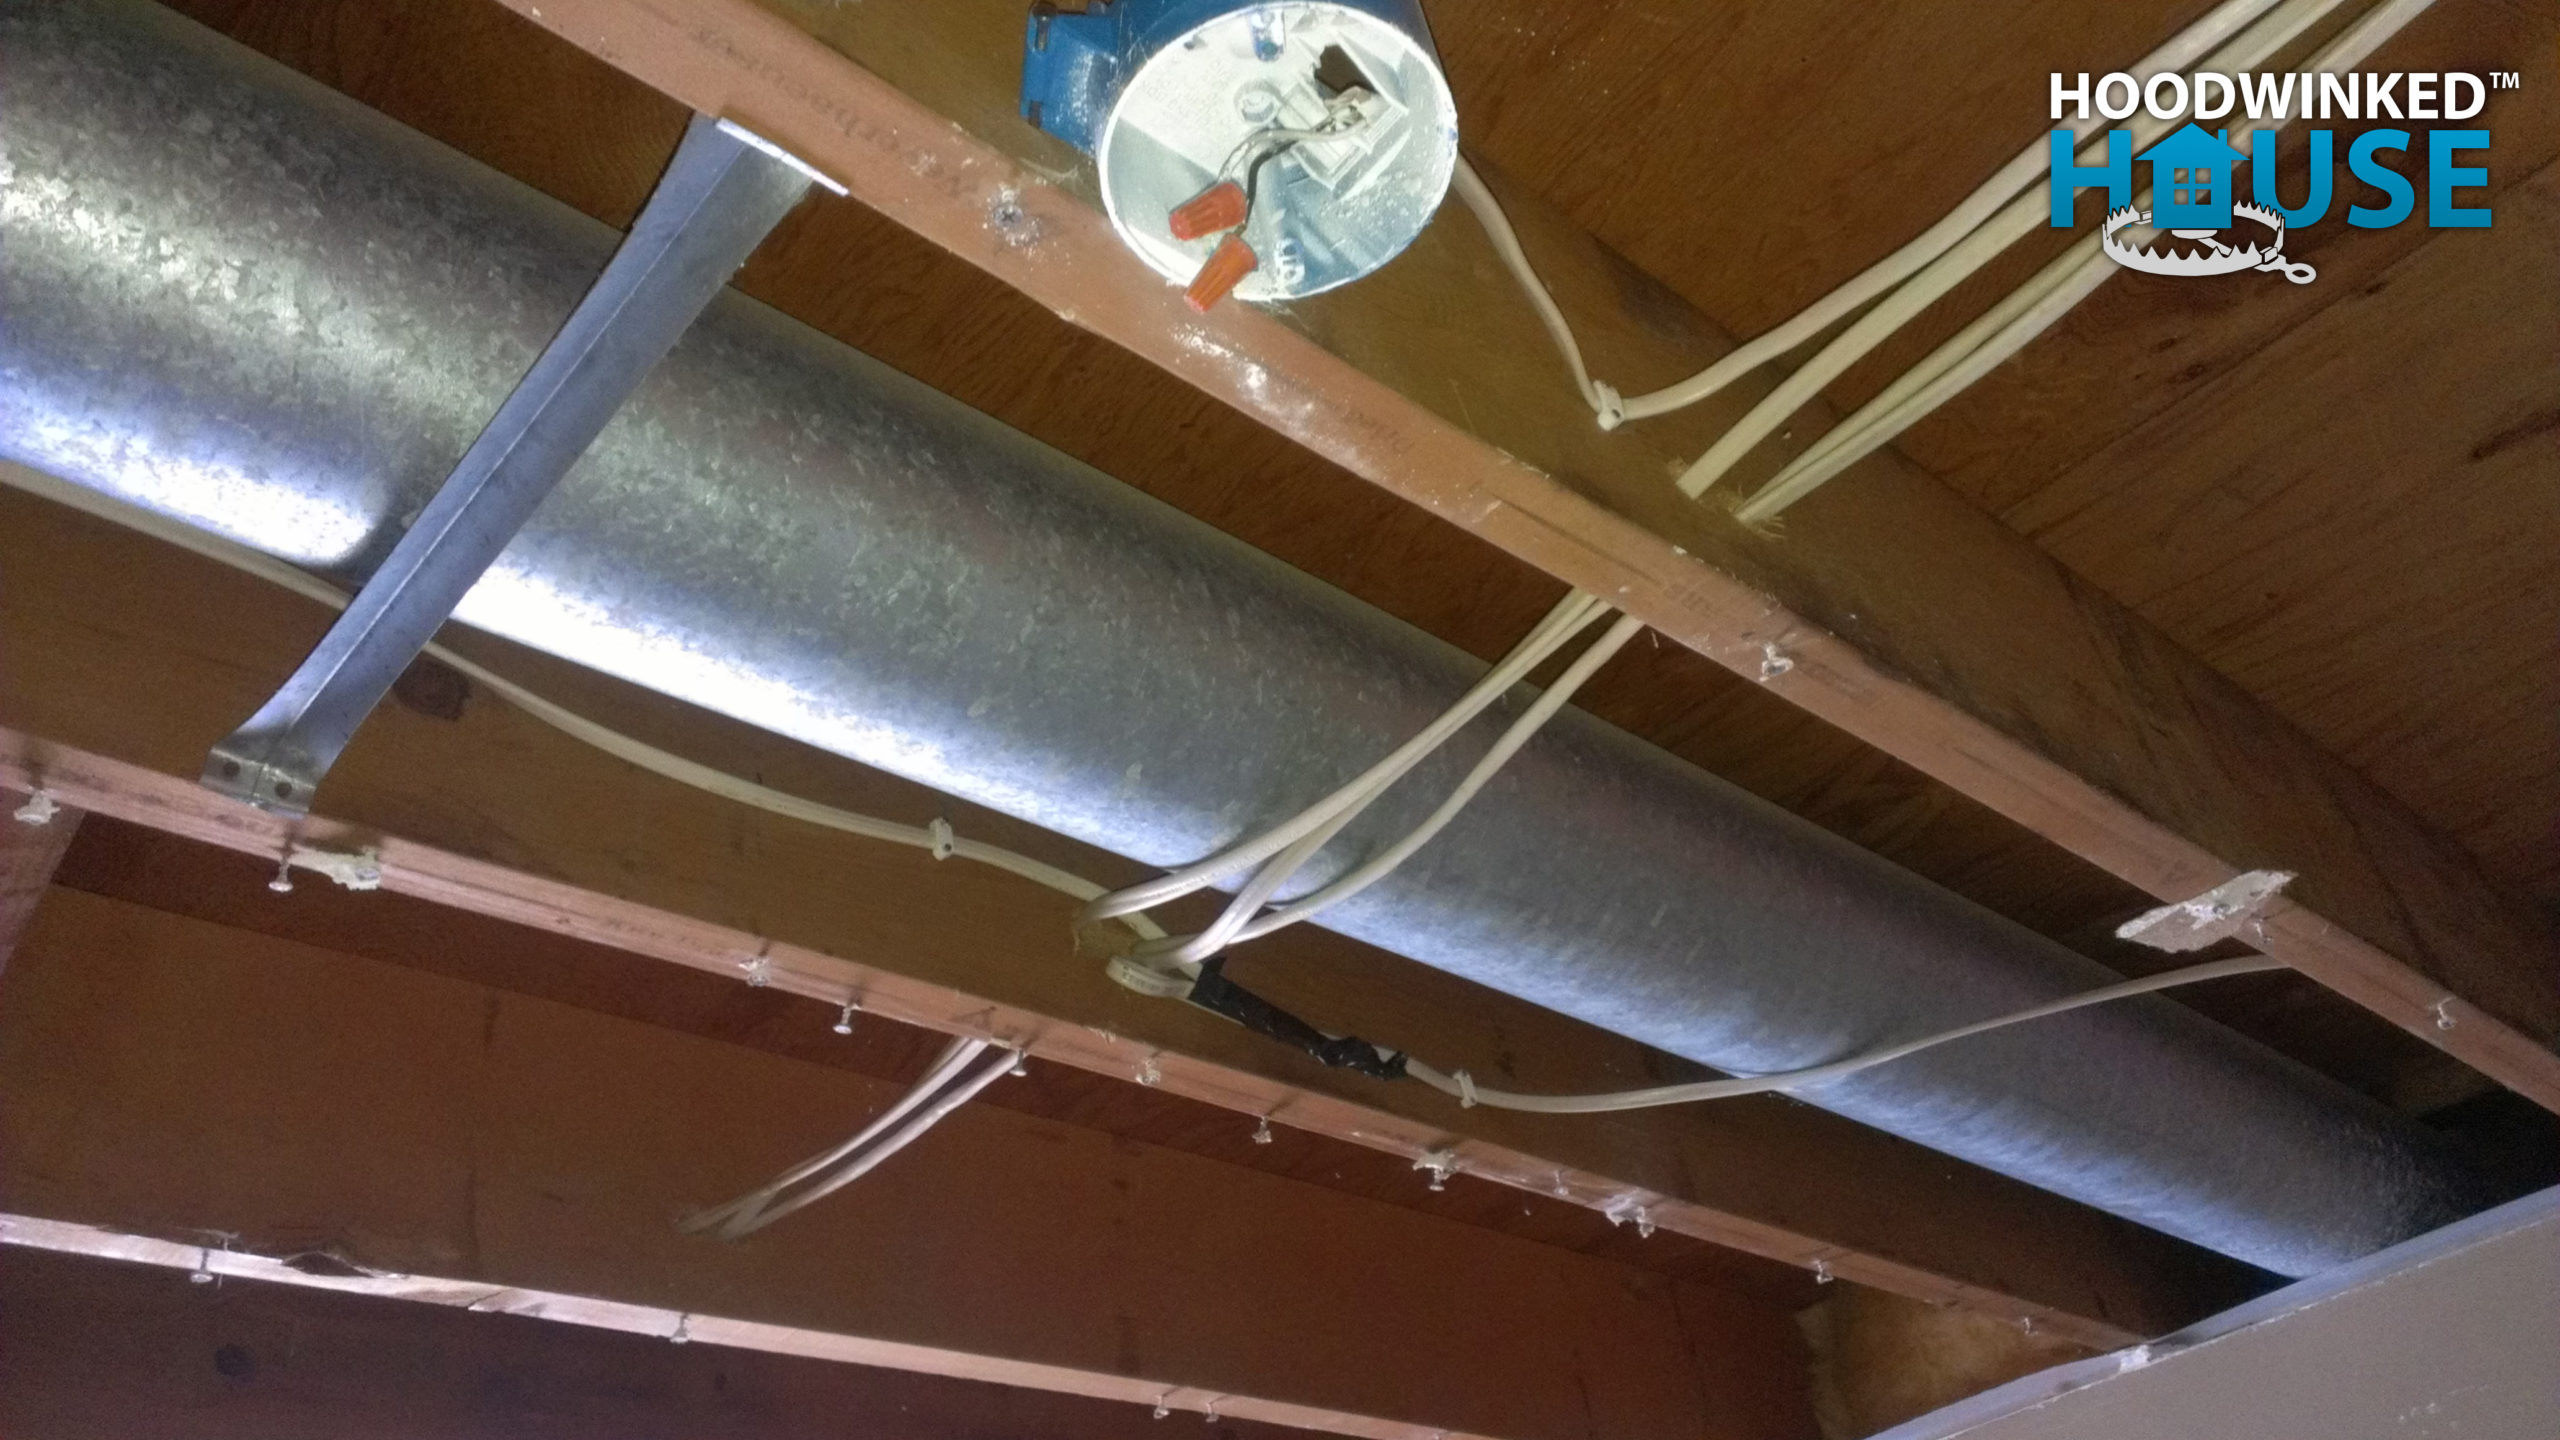 A demolished ceiling reveals a wire splice without a junction box that was illegally hidden behind the drywall.